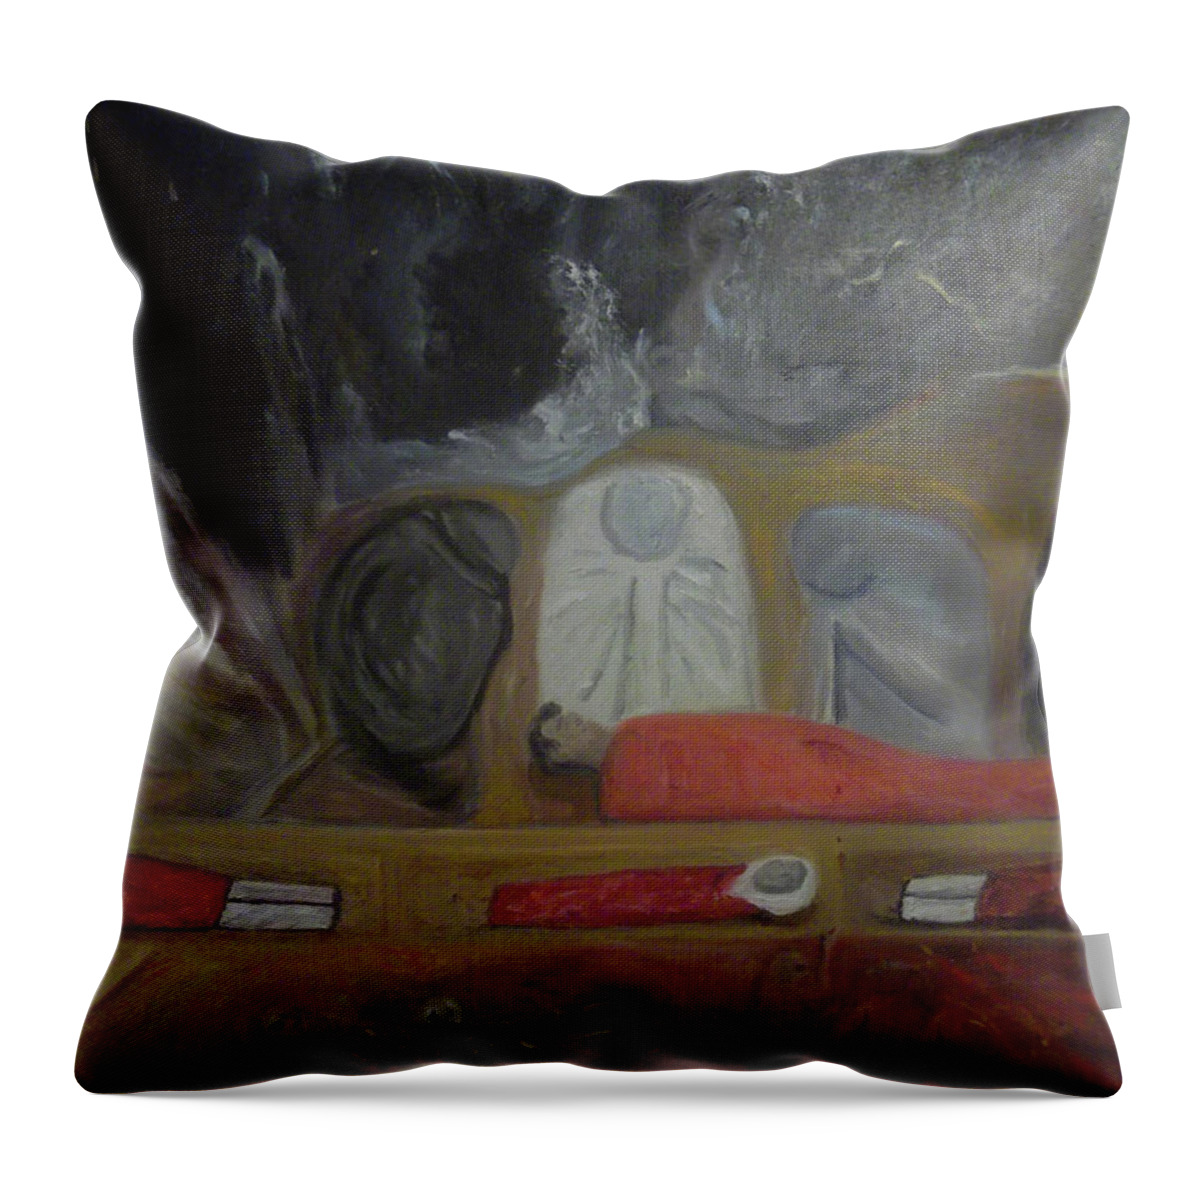 Anguish Throw Pillow featuring the painting Endless Anguish by Susan Esbensen